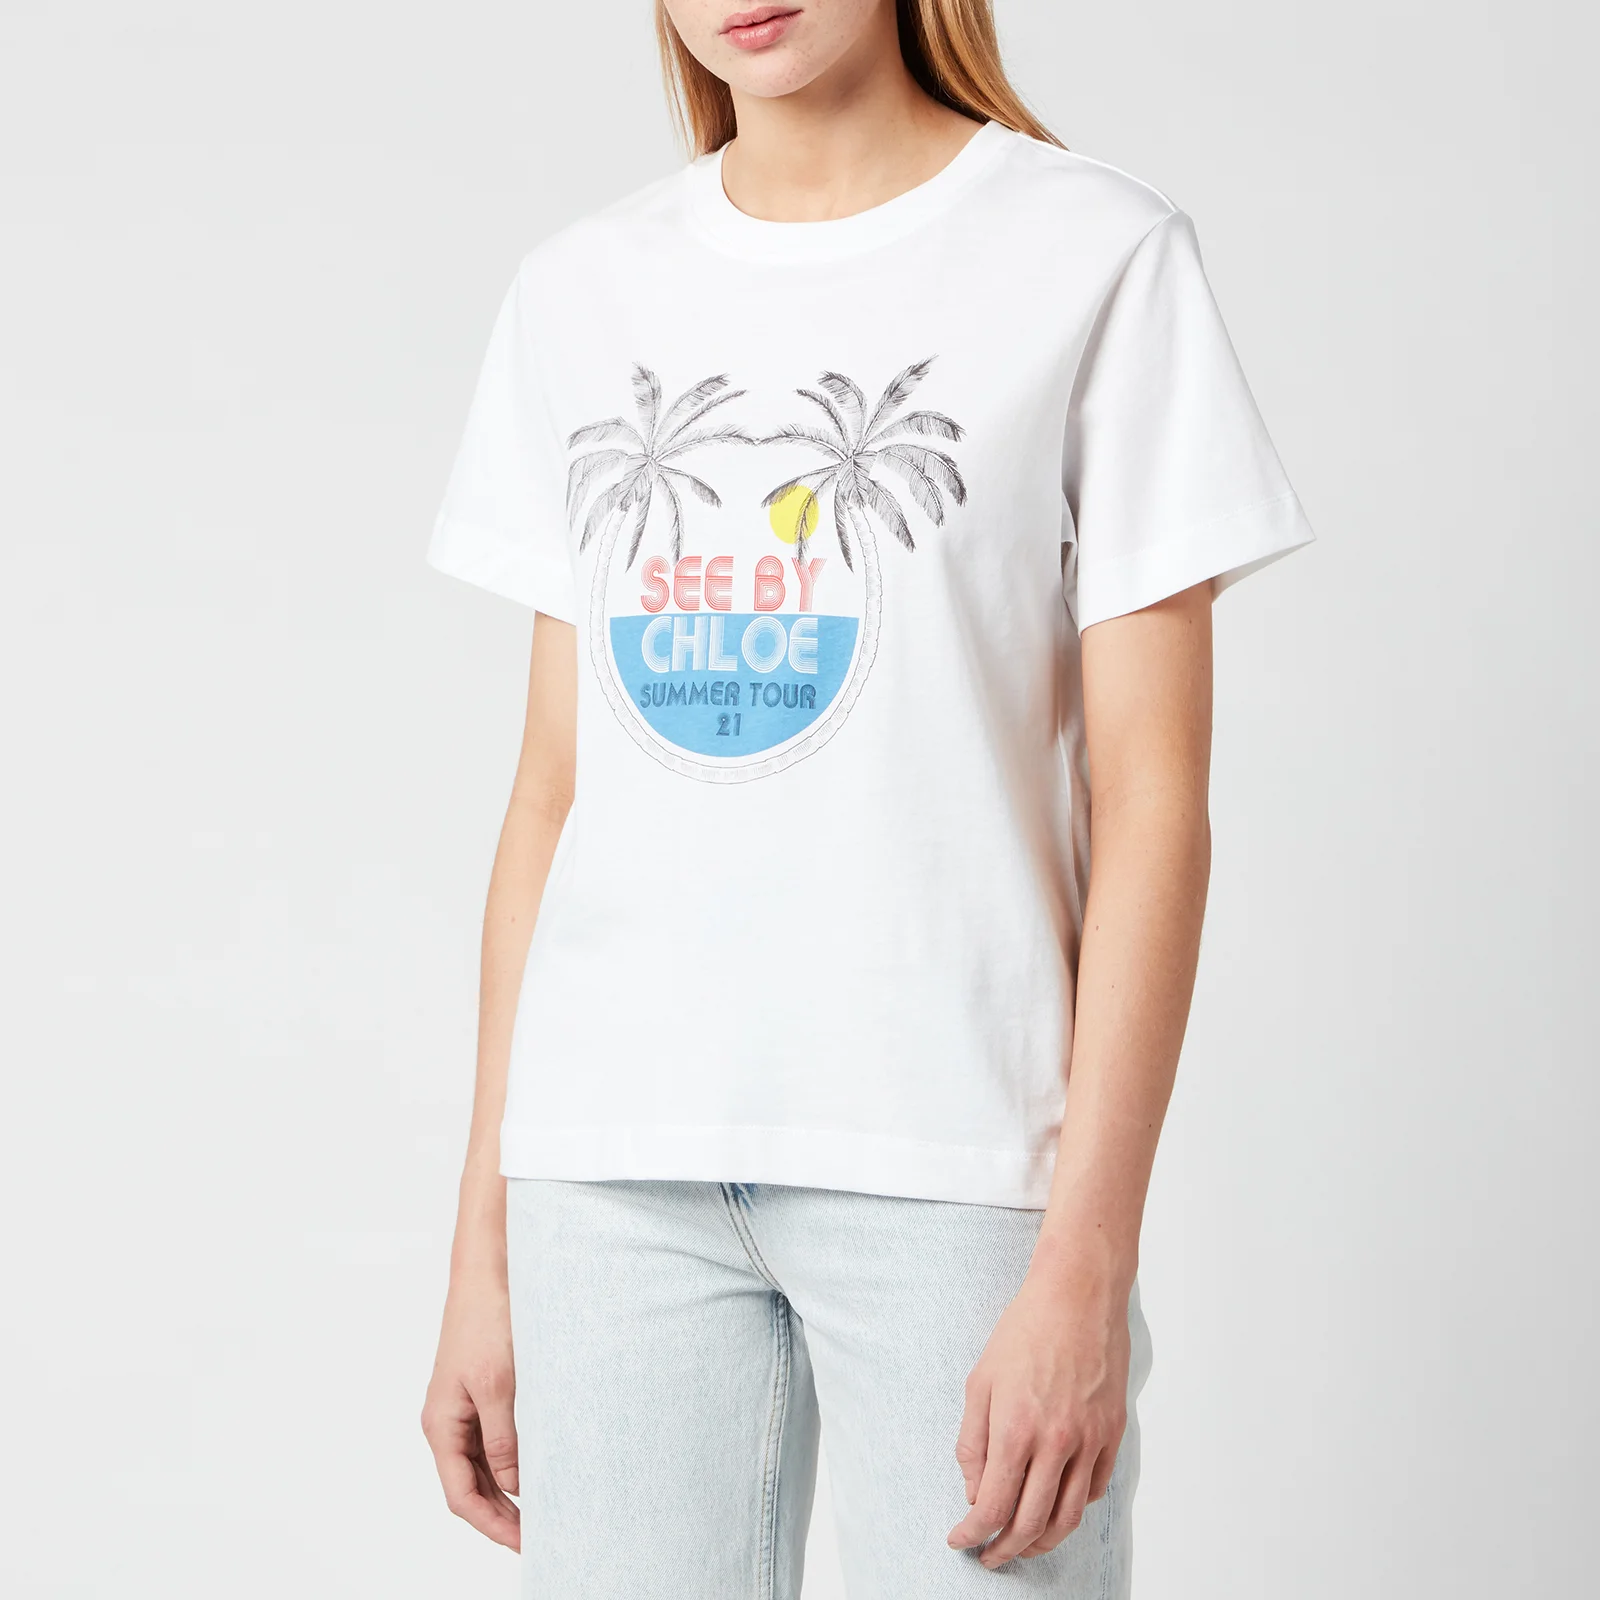 See by Chloé Women's Summer Tour On Cotton Jersey T-Shirt - White Image 1